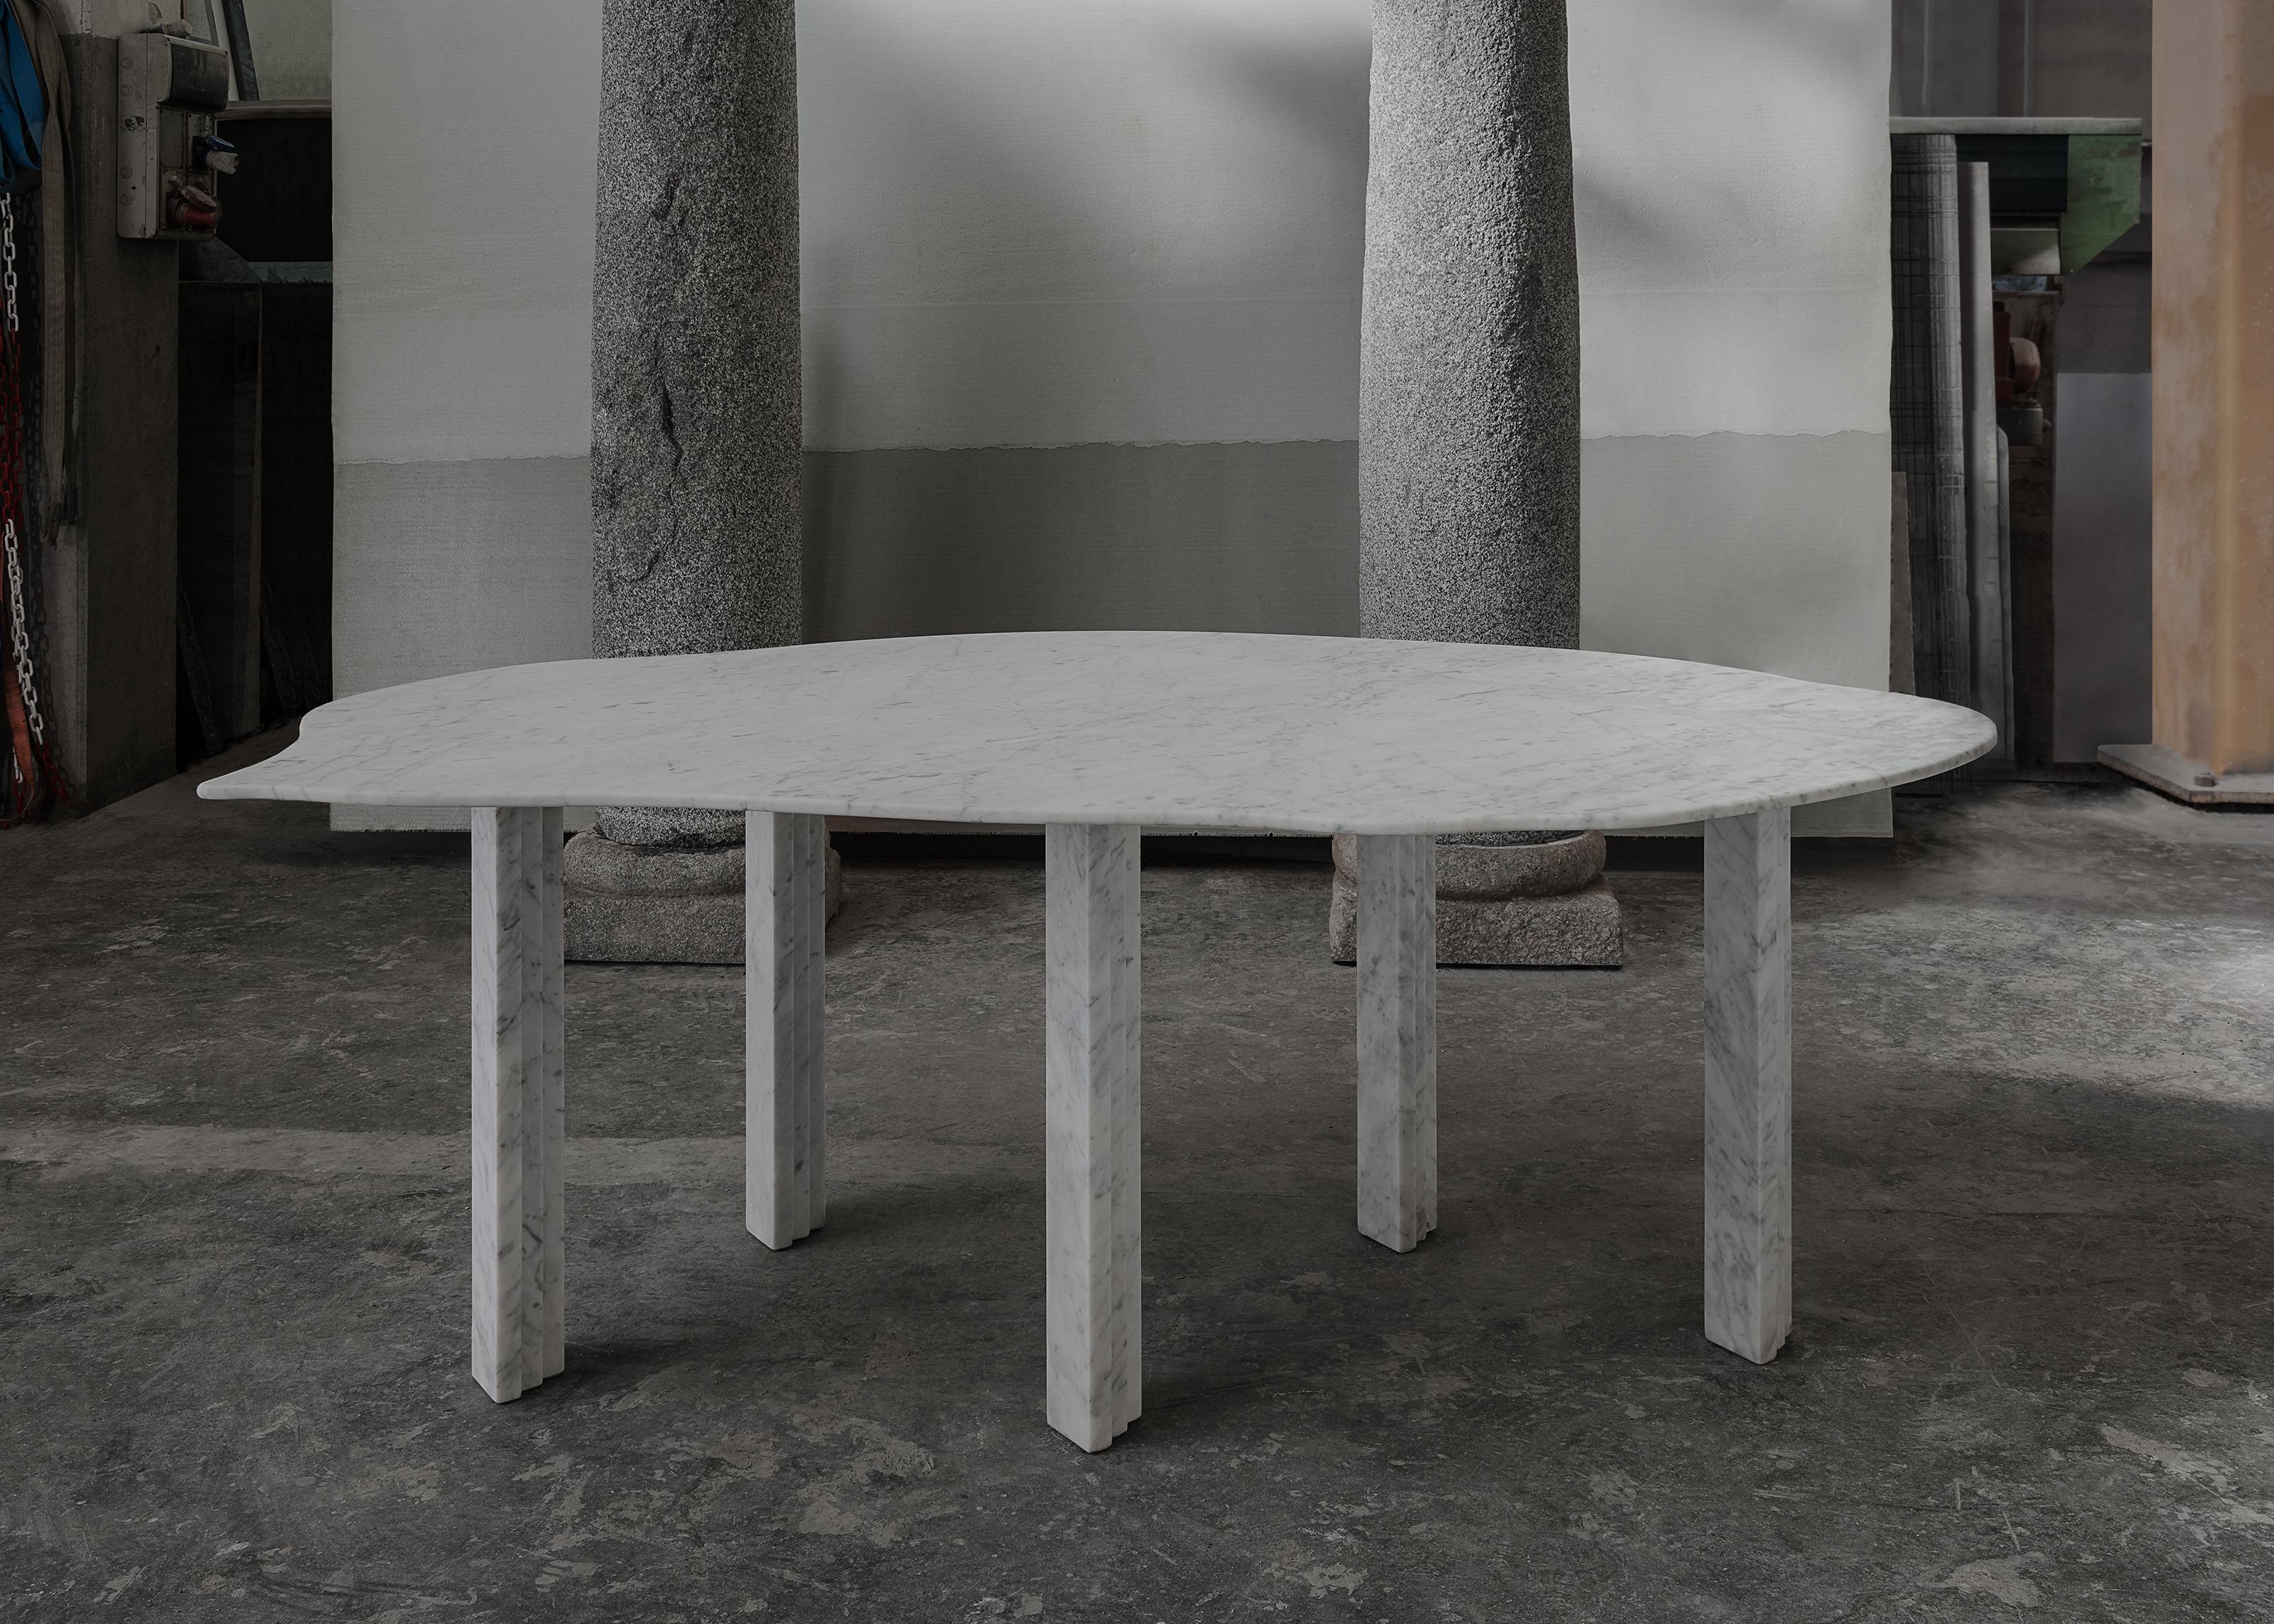 Sculptural white marble table, Lorenzo Bini
Title: Cyclamen
Measures: 190 x 115 x H 73,5 cm
Materials: bianco Carrara

Also available as a Coffee table 95 x 63 x H 37 cm
Please contact us.
Six tableaux is a series of marble tables designed by